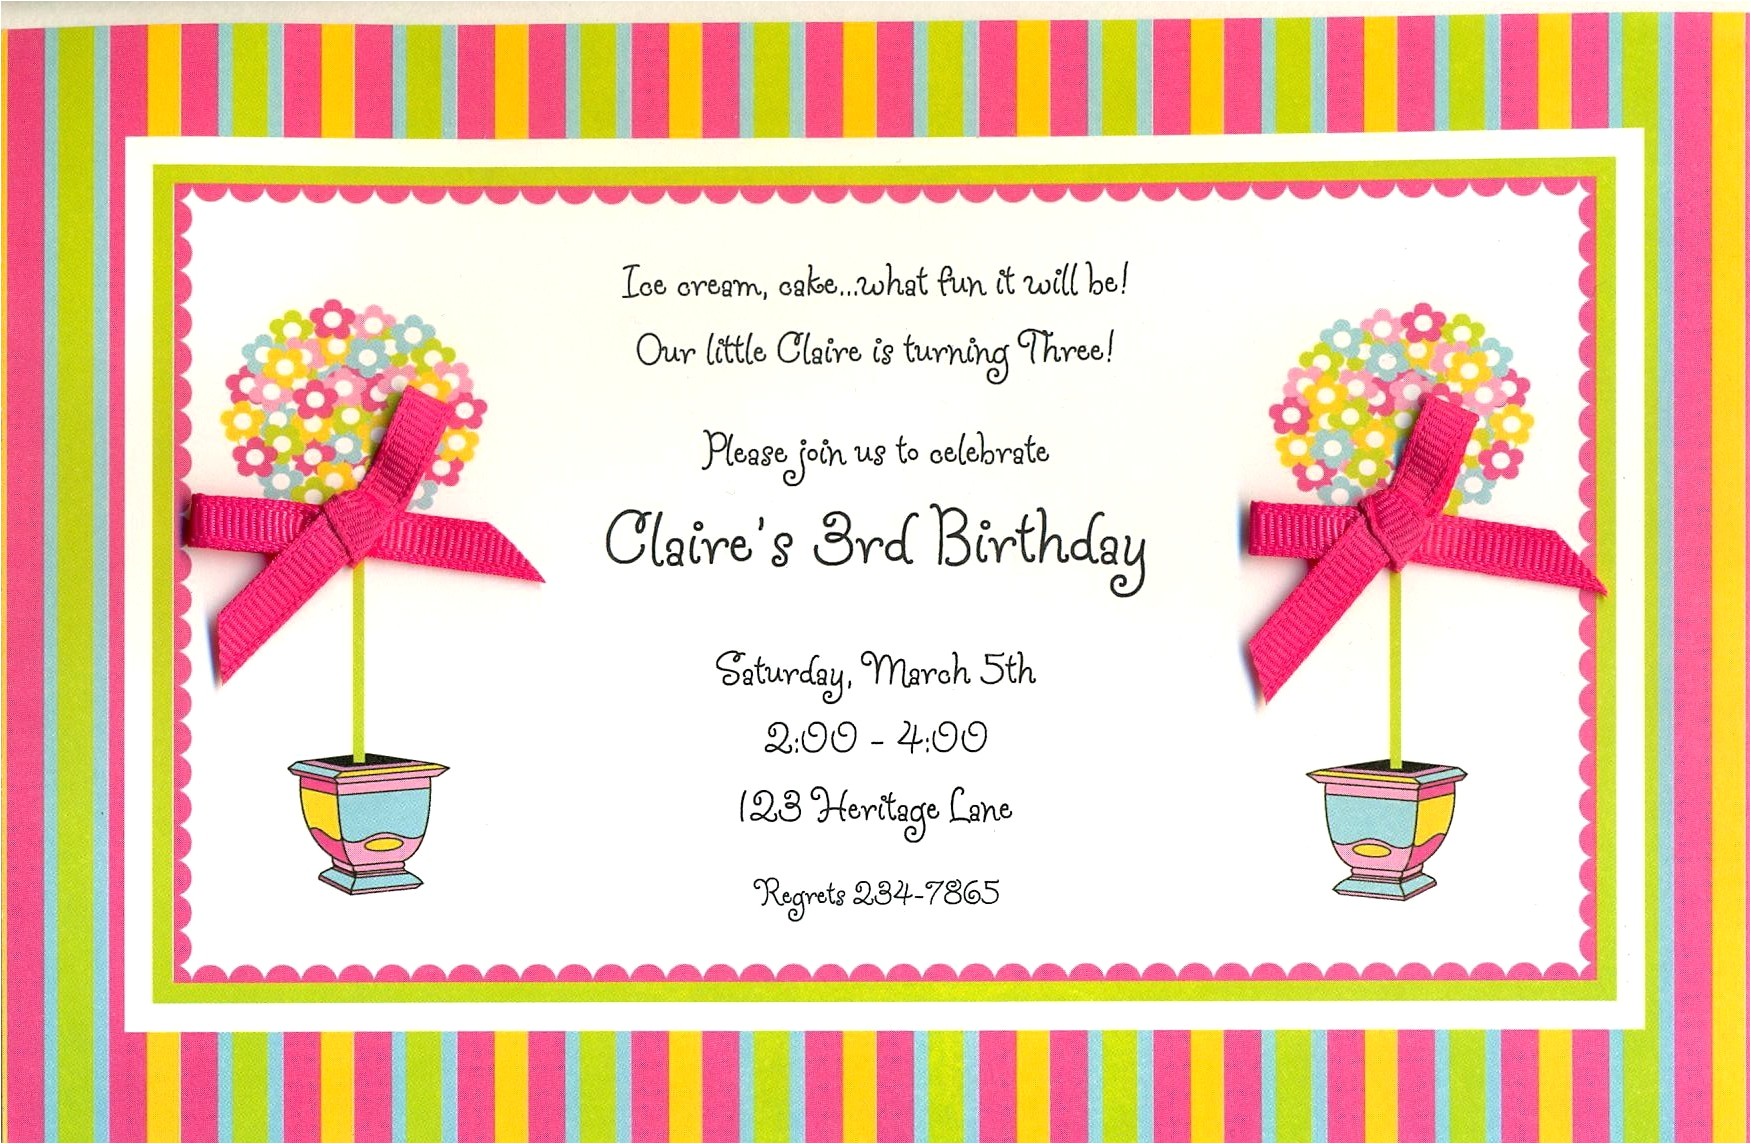 5th birthday card messages beautiful template 5th birthday invitation message for daughter also 5th